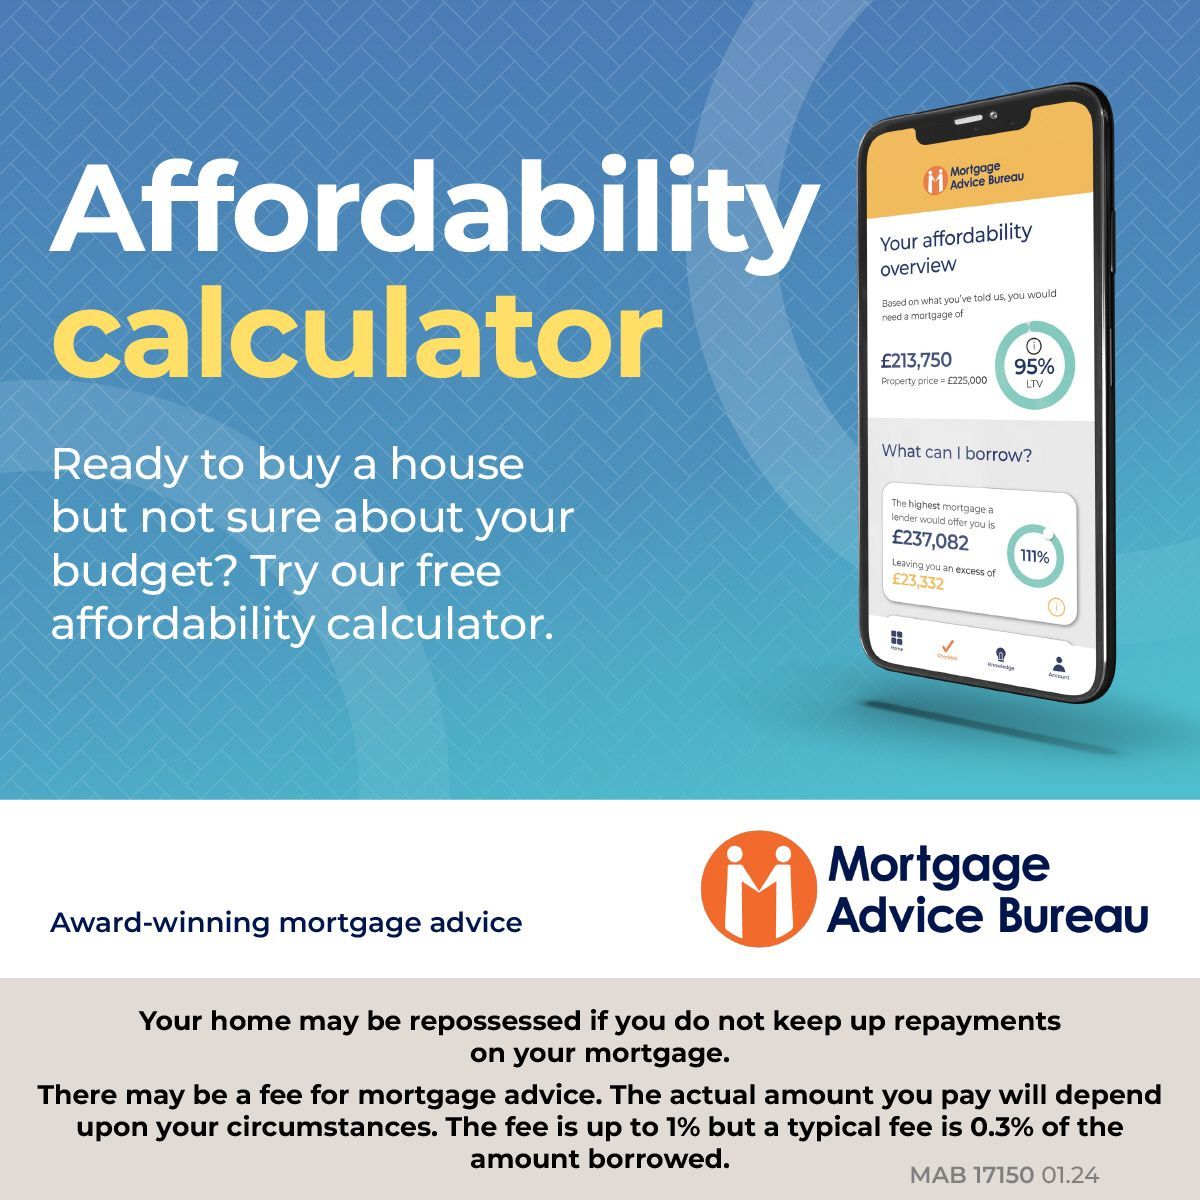 When you start looking for a mortgage, one of the main things you need to know is how much you can borrow. Using our mortgage affordability calculator, you can get ahead of the curve: buff.ly/4cSc93M #mortgagehelp #mortgagebroker #mortgageadvice #affordabilitycalculator